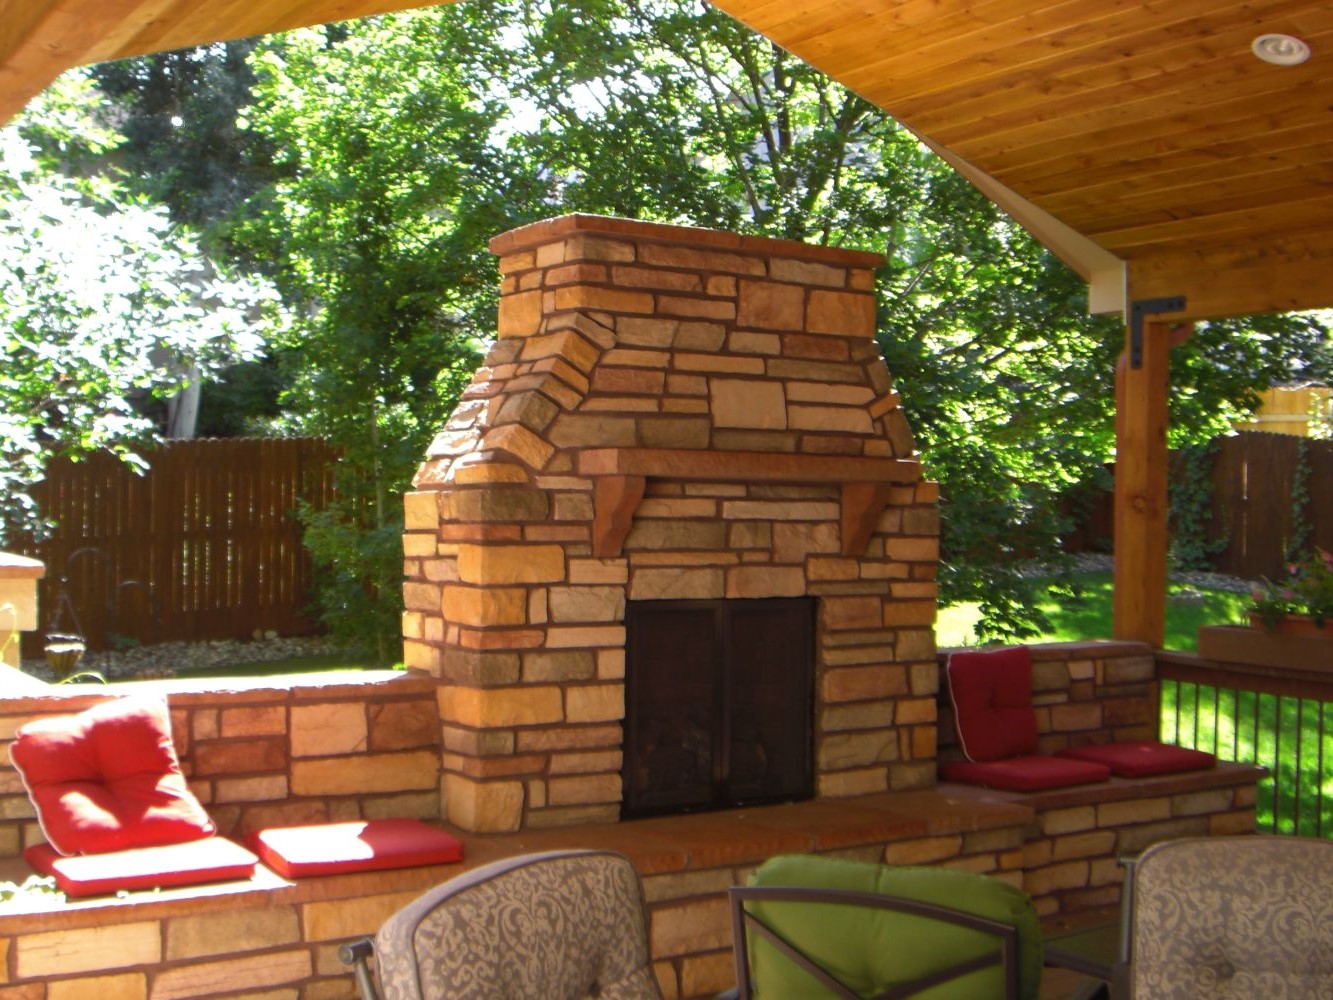 Wood-burning, stone fireplace on a covered deck.